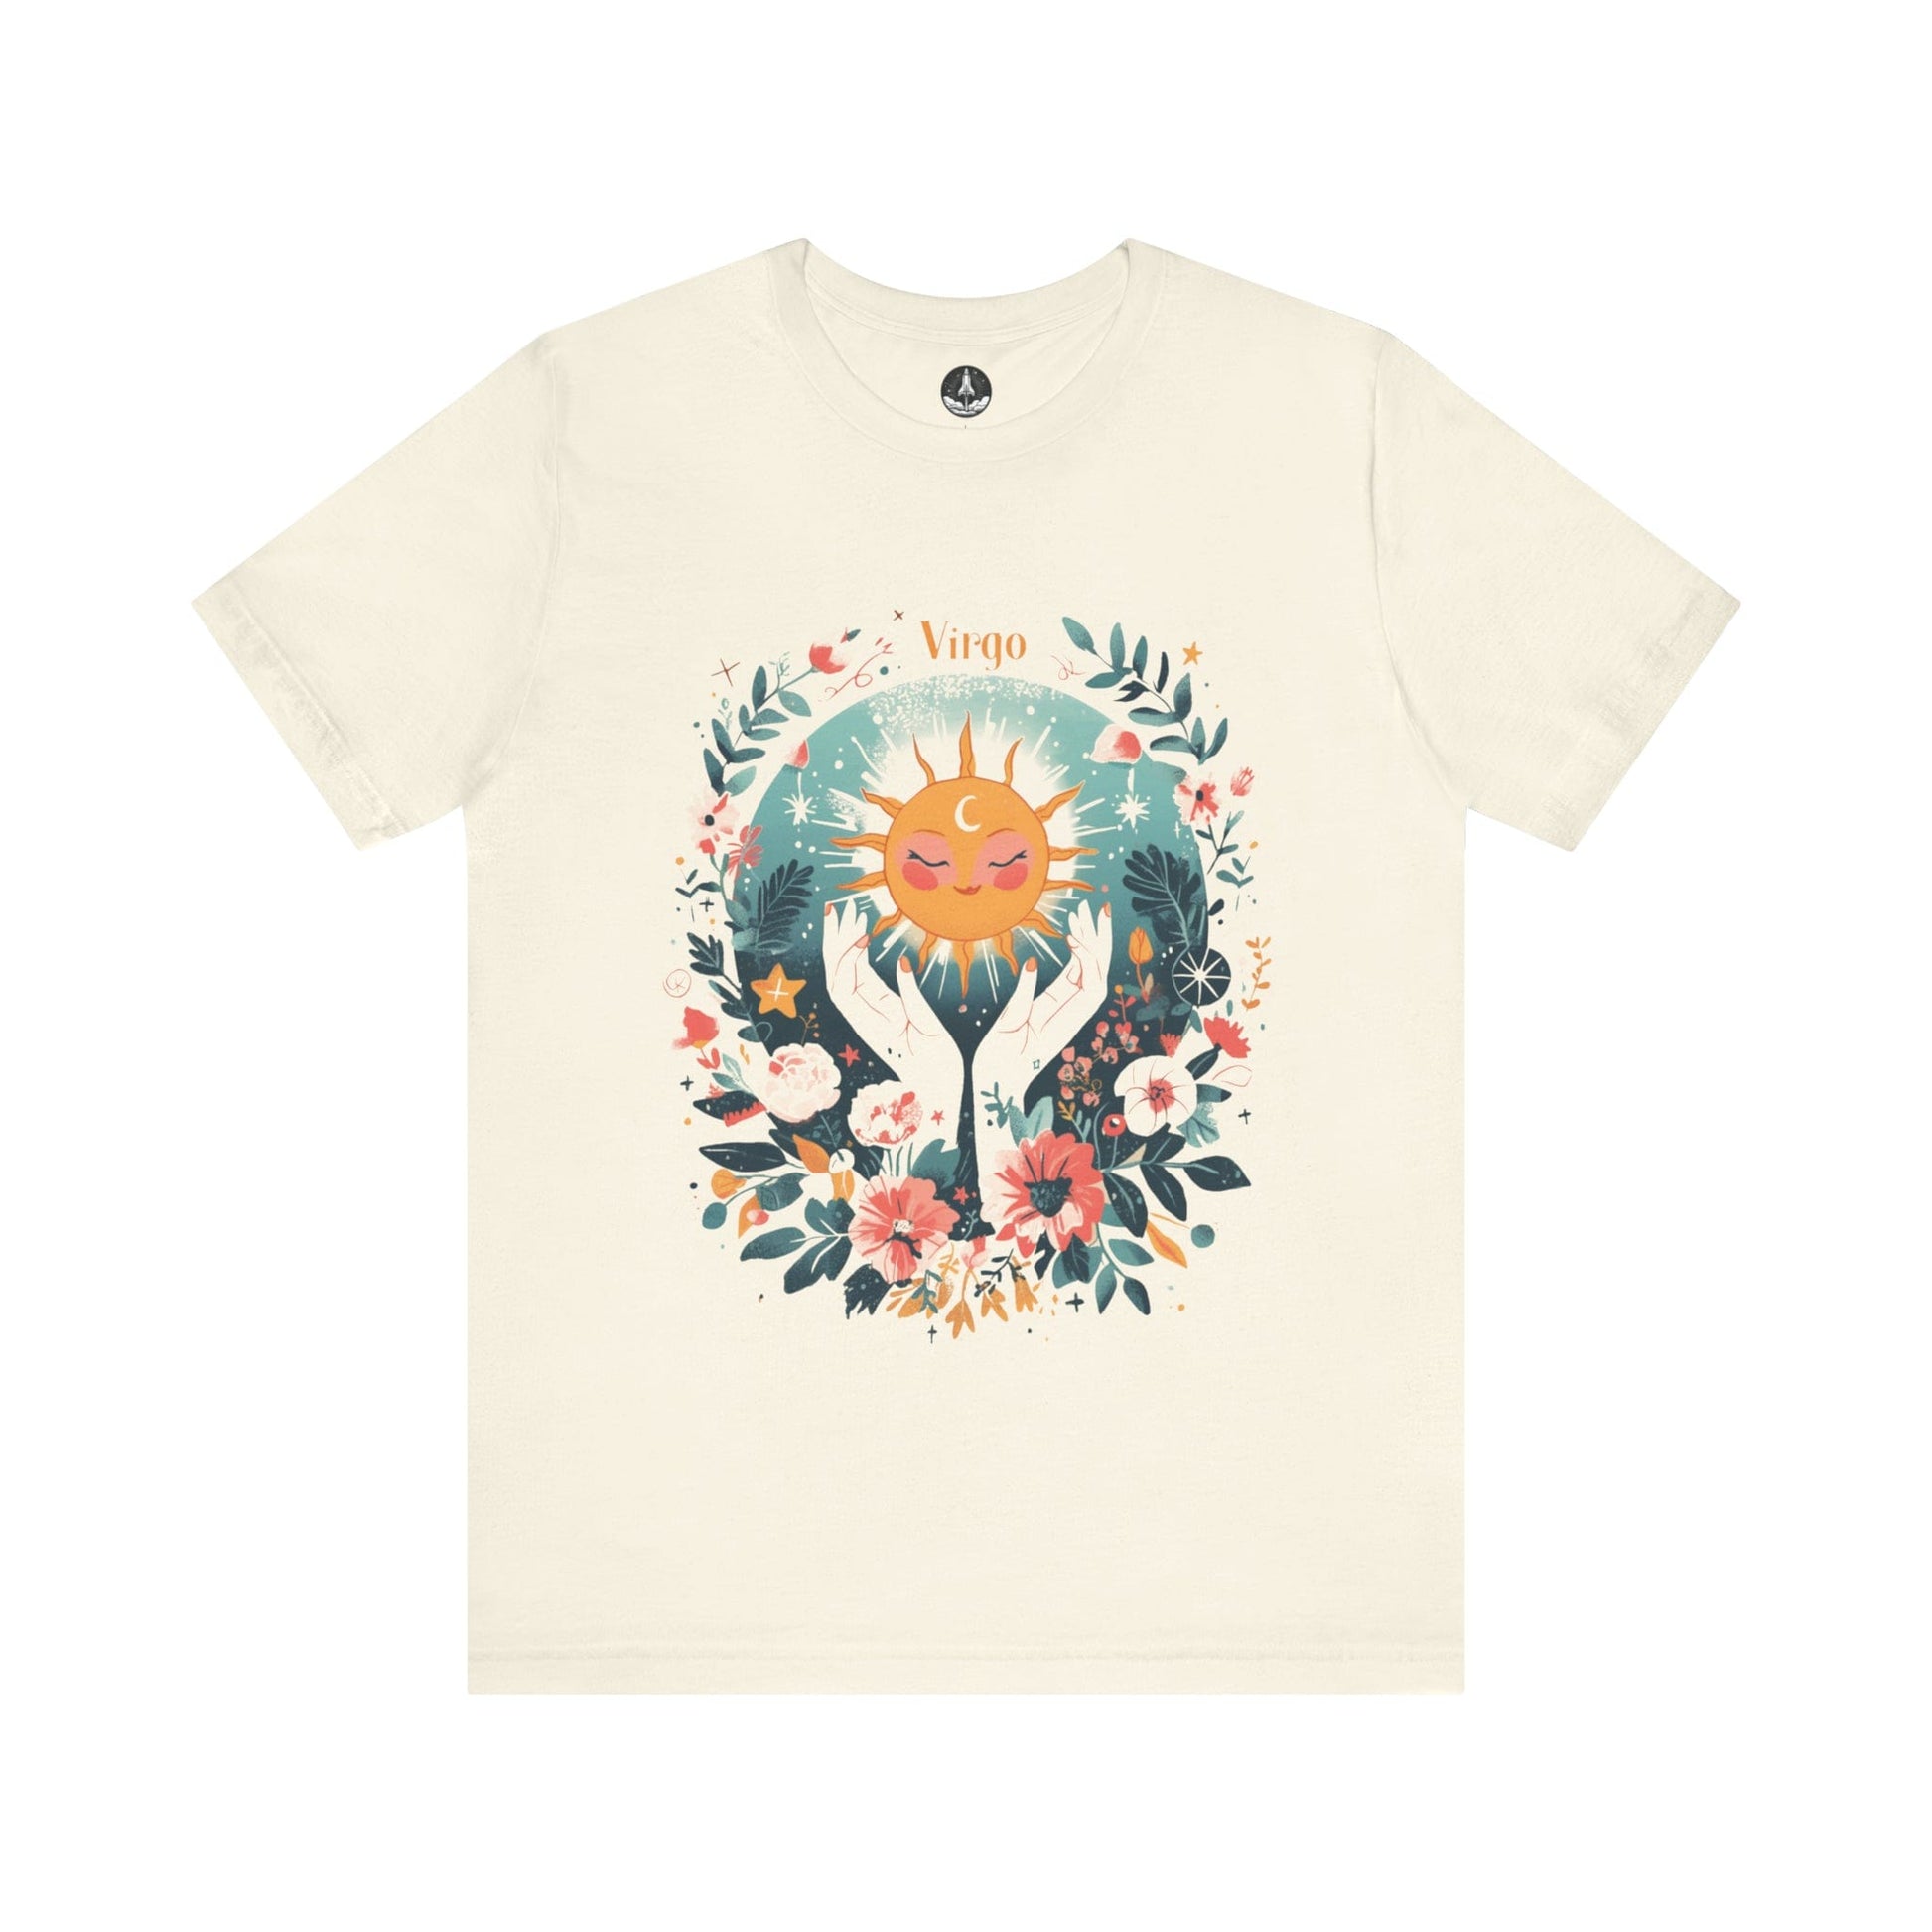 T-Shirt Natural / S Sunlit Maiden Virgo TShirt: Blossoming with Detail